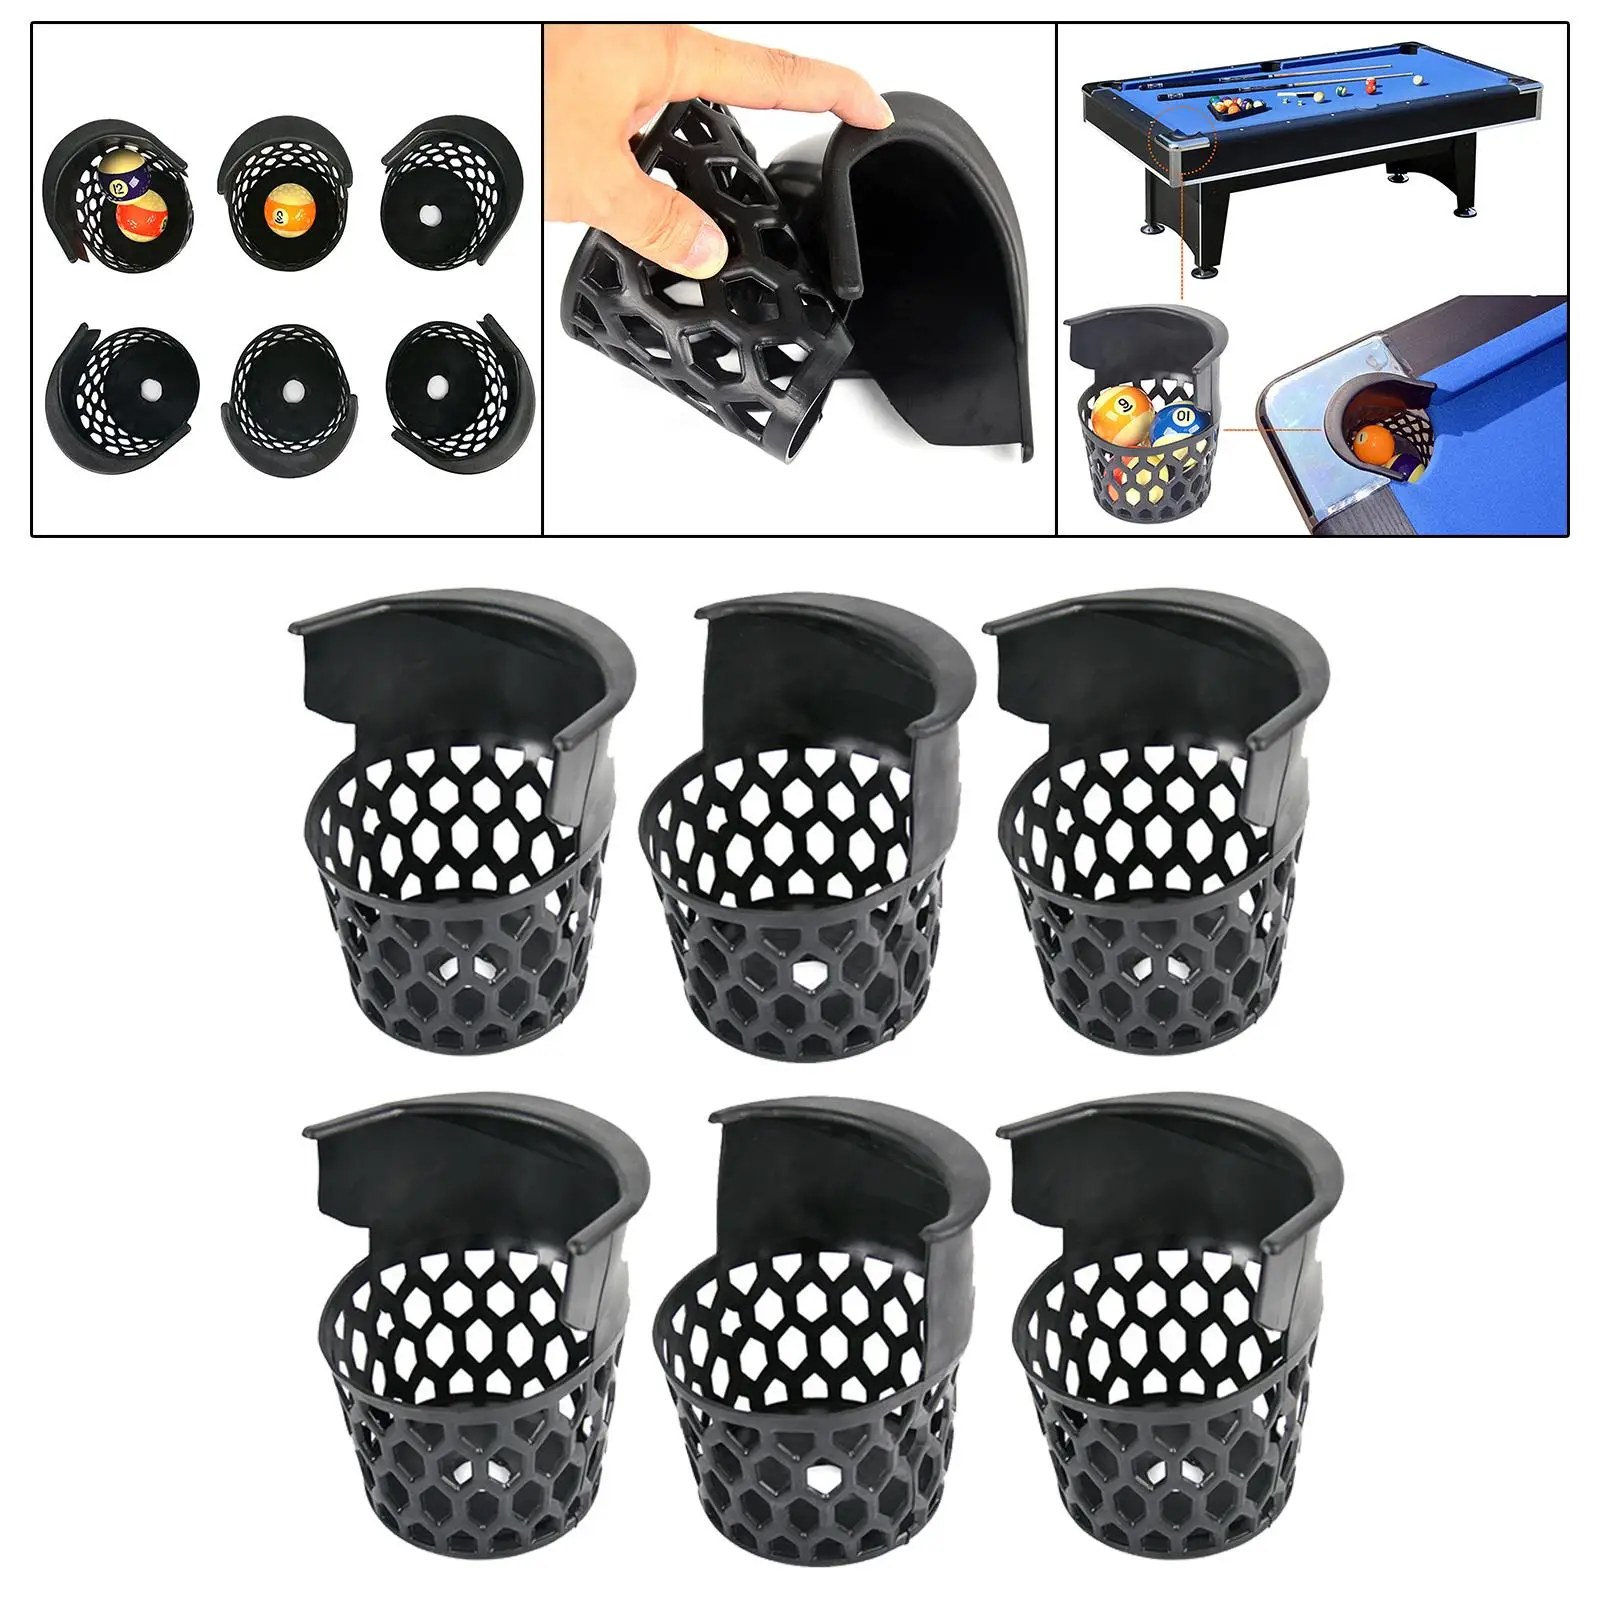 6x Pool Table Billiard Pockets Set Pool Table Drop Nets Storage with 12 Screws Premium Snooker Baskets Replacement Pockets